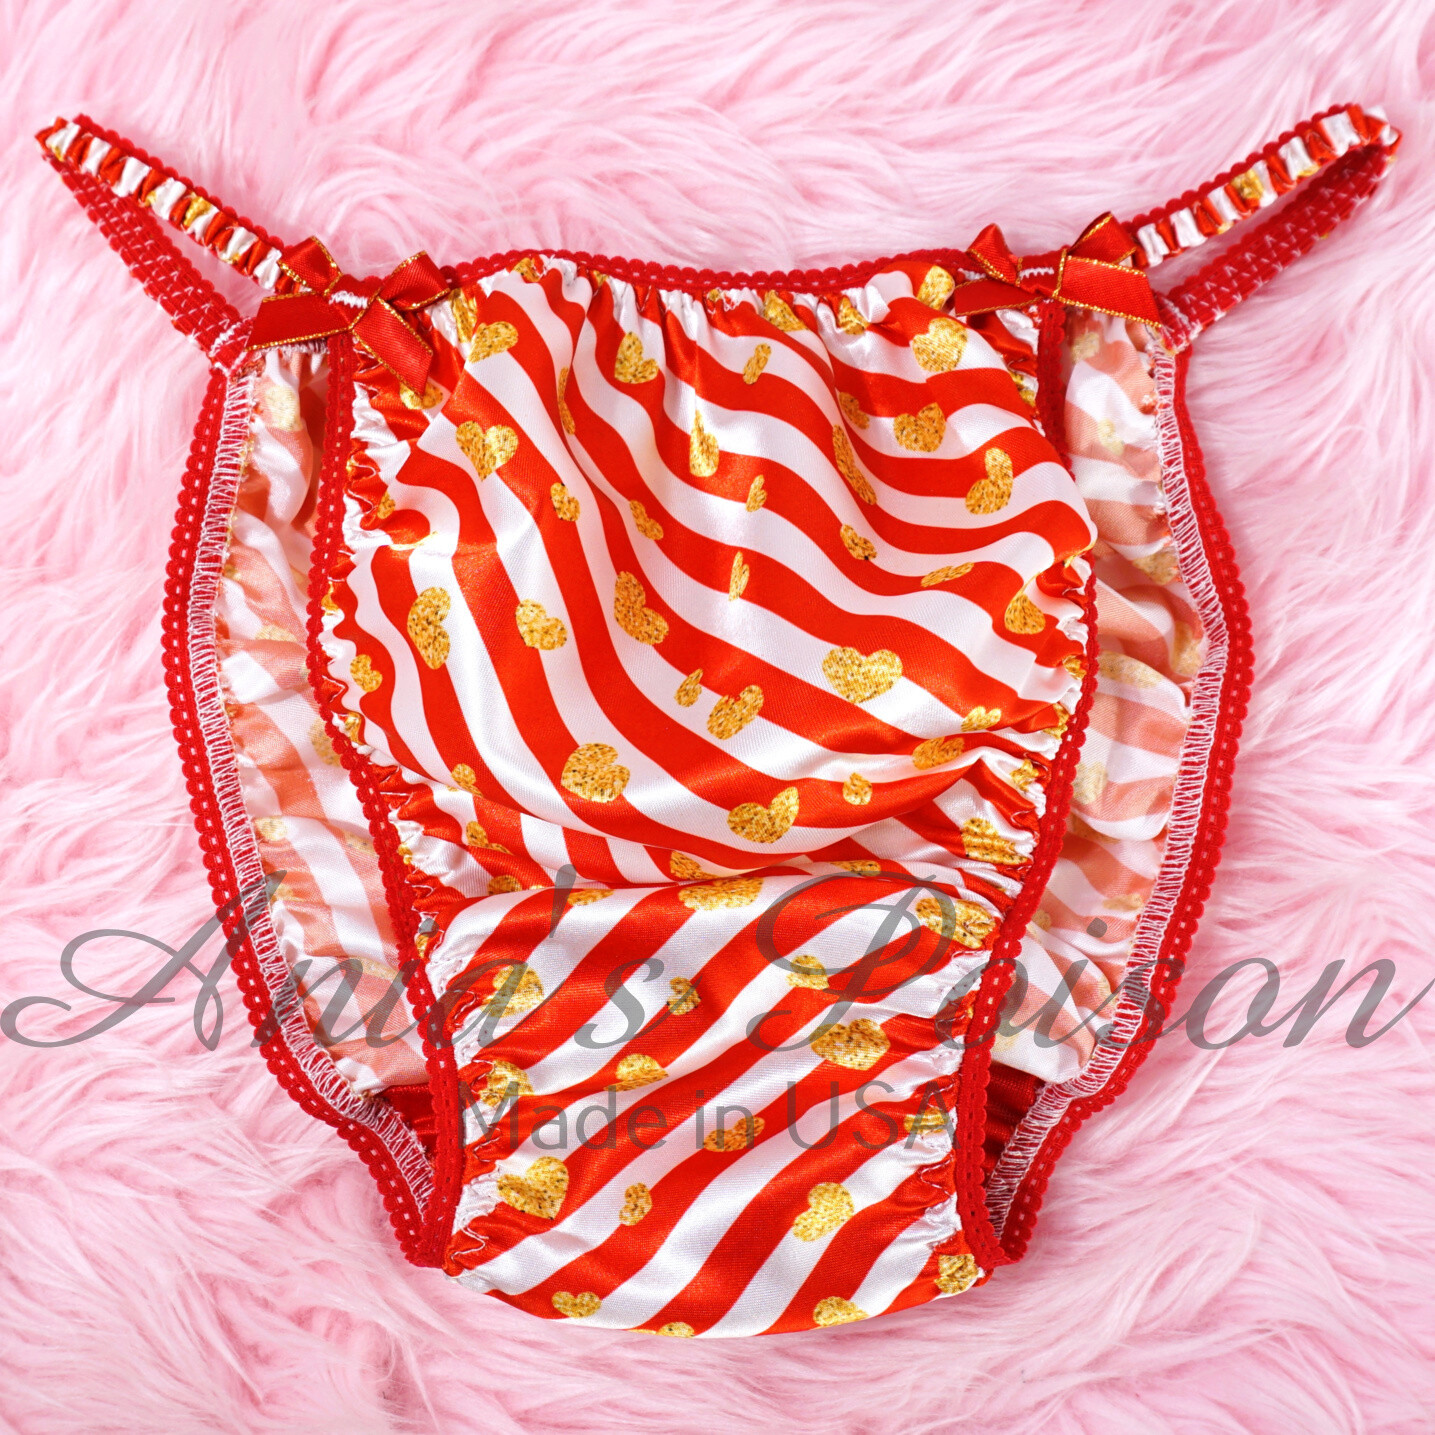 Valentine's Day Red Hearts and stripes Ania's Poison Cut sissy MENS SATIN Beautiful Shiny Silky wet look Mens holiday string Bikini panties LIMITED EDITION